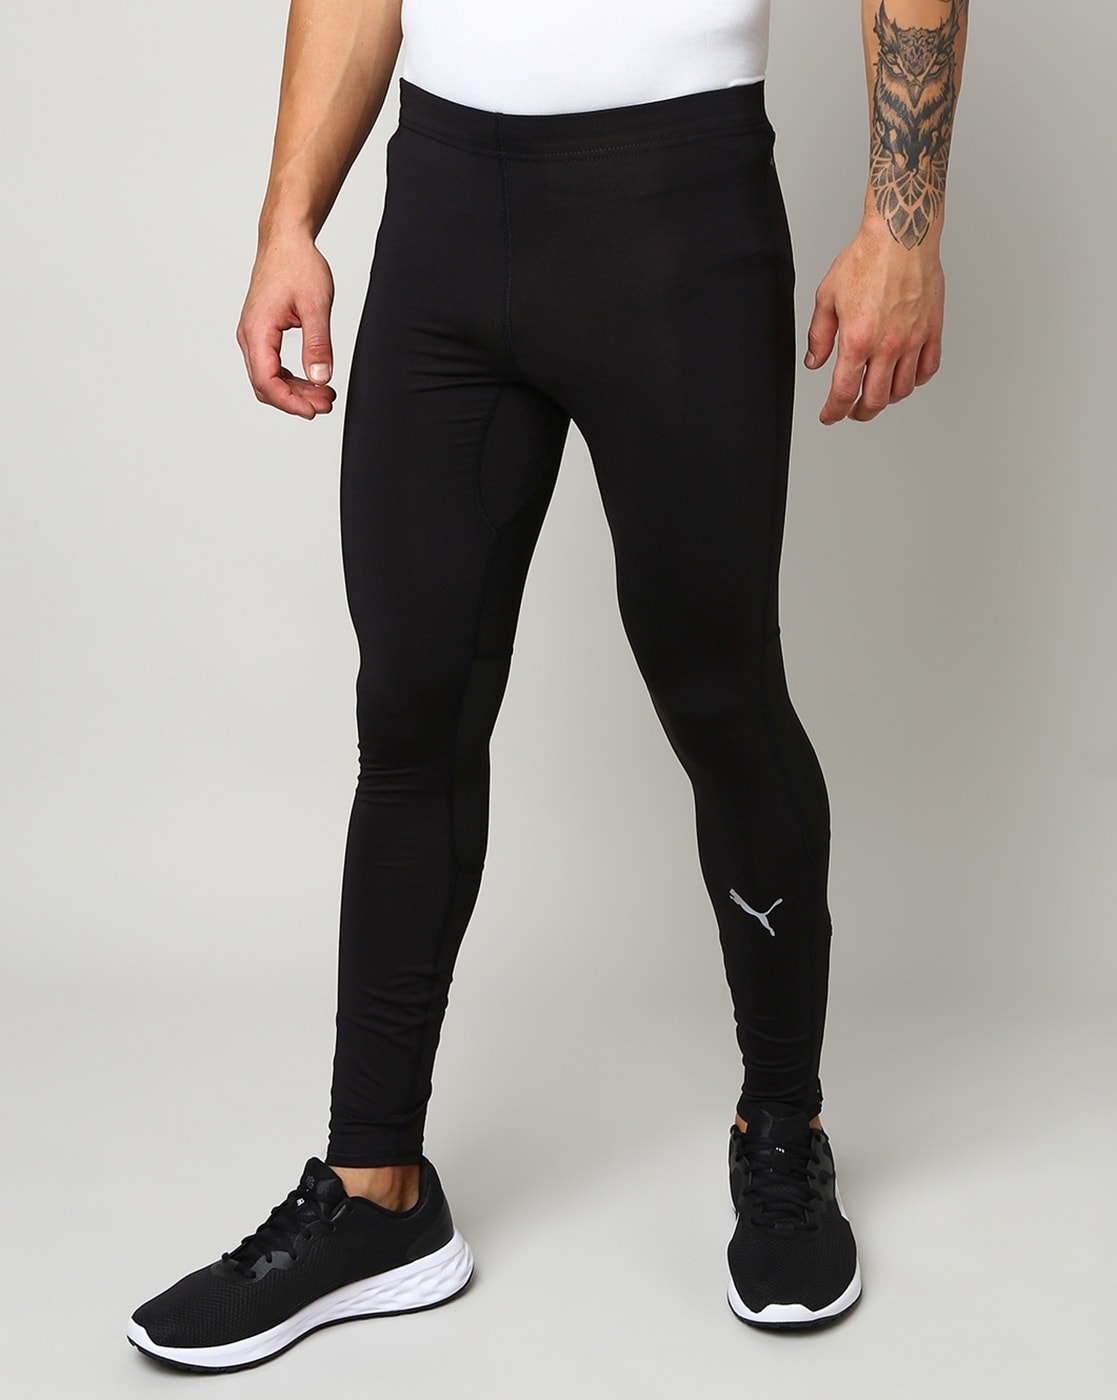 New To The Gym|men's Running Pants - Quick Dry, Breathable, Elastic Waist,  Gym & Fitness